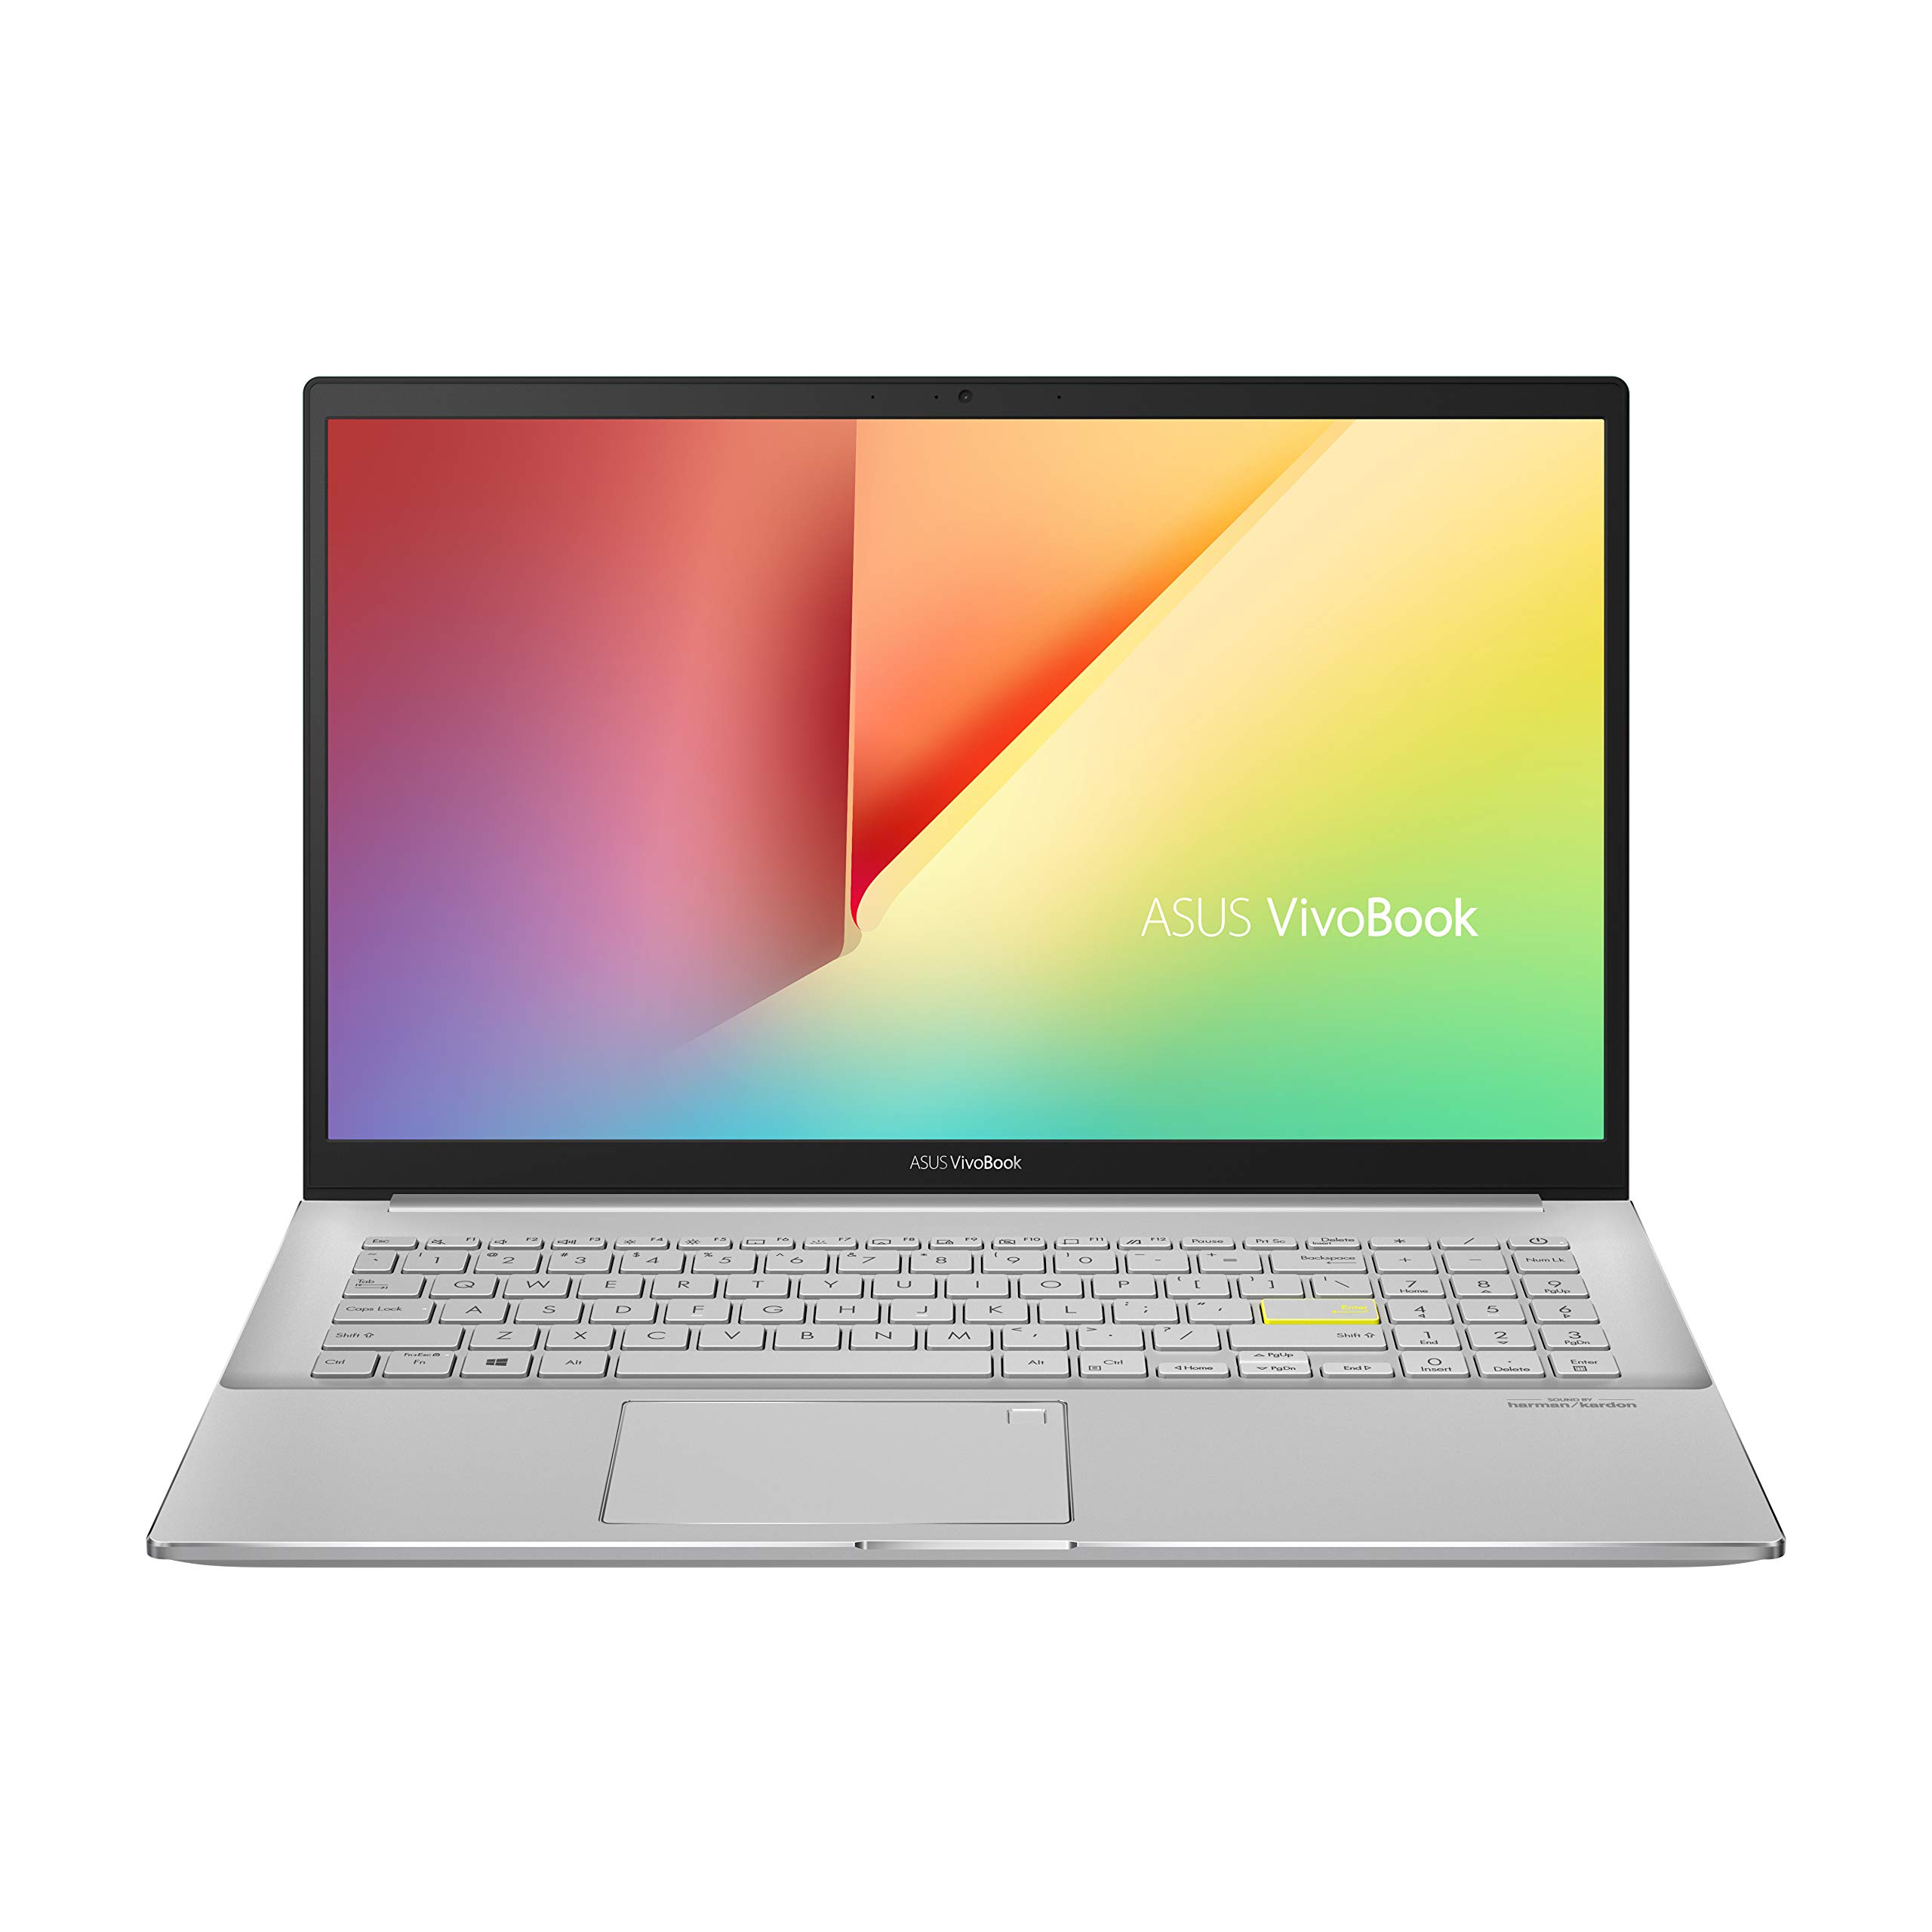 ASUS VivoBook S15 S533 Thin and Light Laptop, 15.6” FHD Display, Intel Core i5-1135G7, 8GB DDR4 RAM, 512GB PCIe SSD, Wi-Fi 6, Windows 10 Home, AI noise-cancellation, Dreamy White, S533EA-DH51-WH